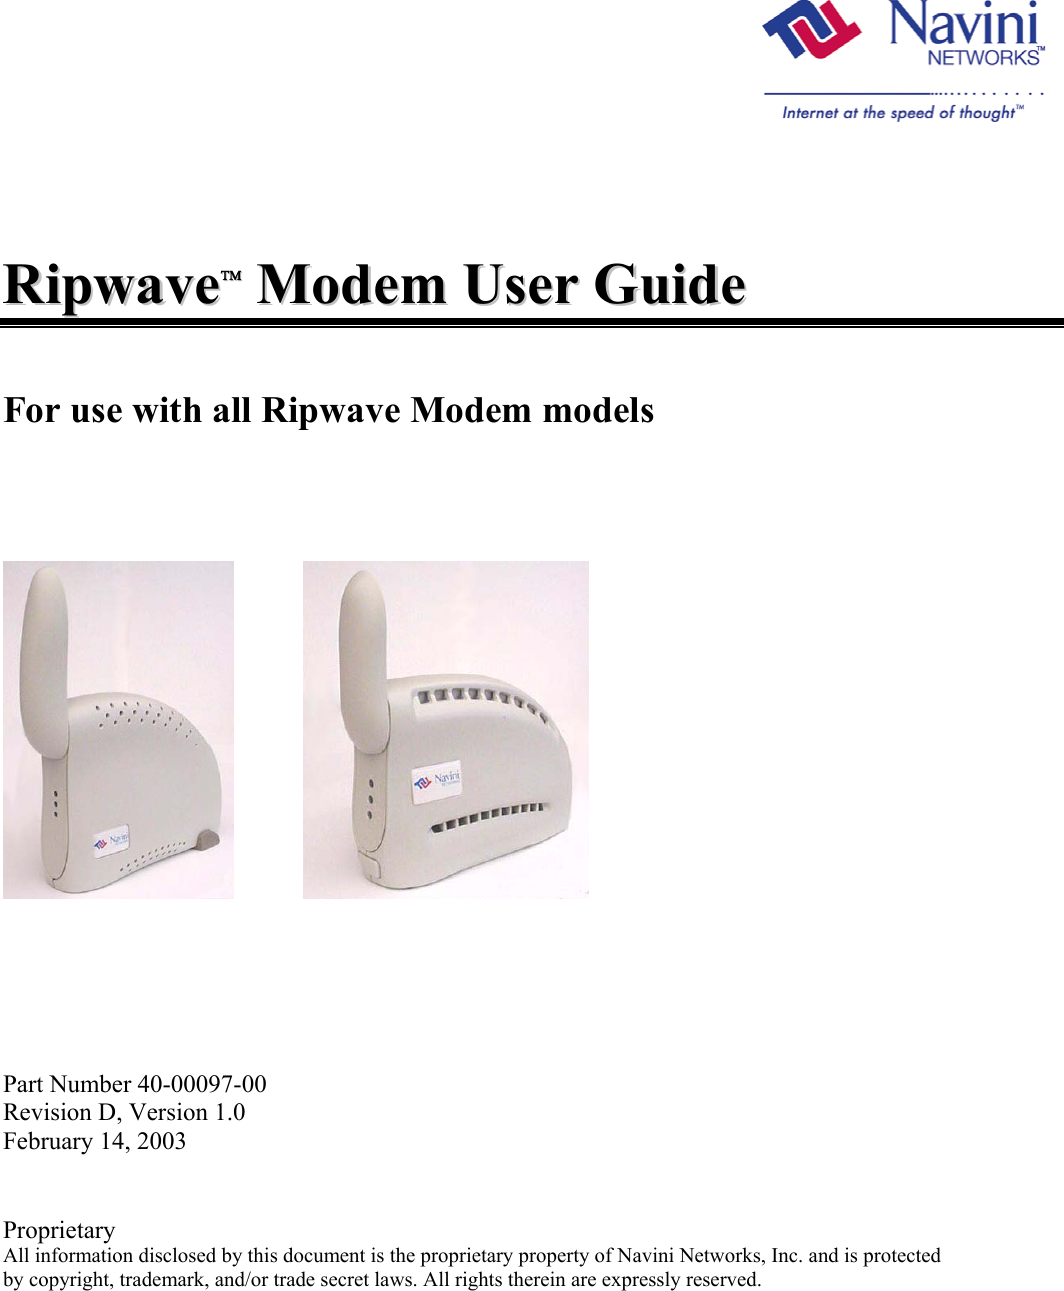        RRiippwwaavvee  MMooddeemm  UUsseerr  GGuuiiddee    For use with all Ripwave Modem models                       Part Number 40-00097-00 Revision D, Version 1.0 February 14, 2003   Proprietary All information disclosed by this document is the proprietary property of Navini Networks, Inc. and is protected  by copyright, trademark, and/or trade secret laws. All rights therein are expressly reserved.   